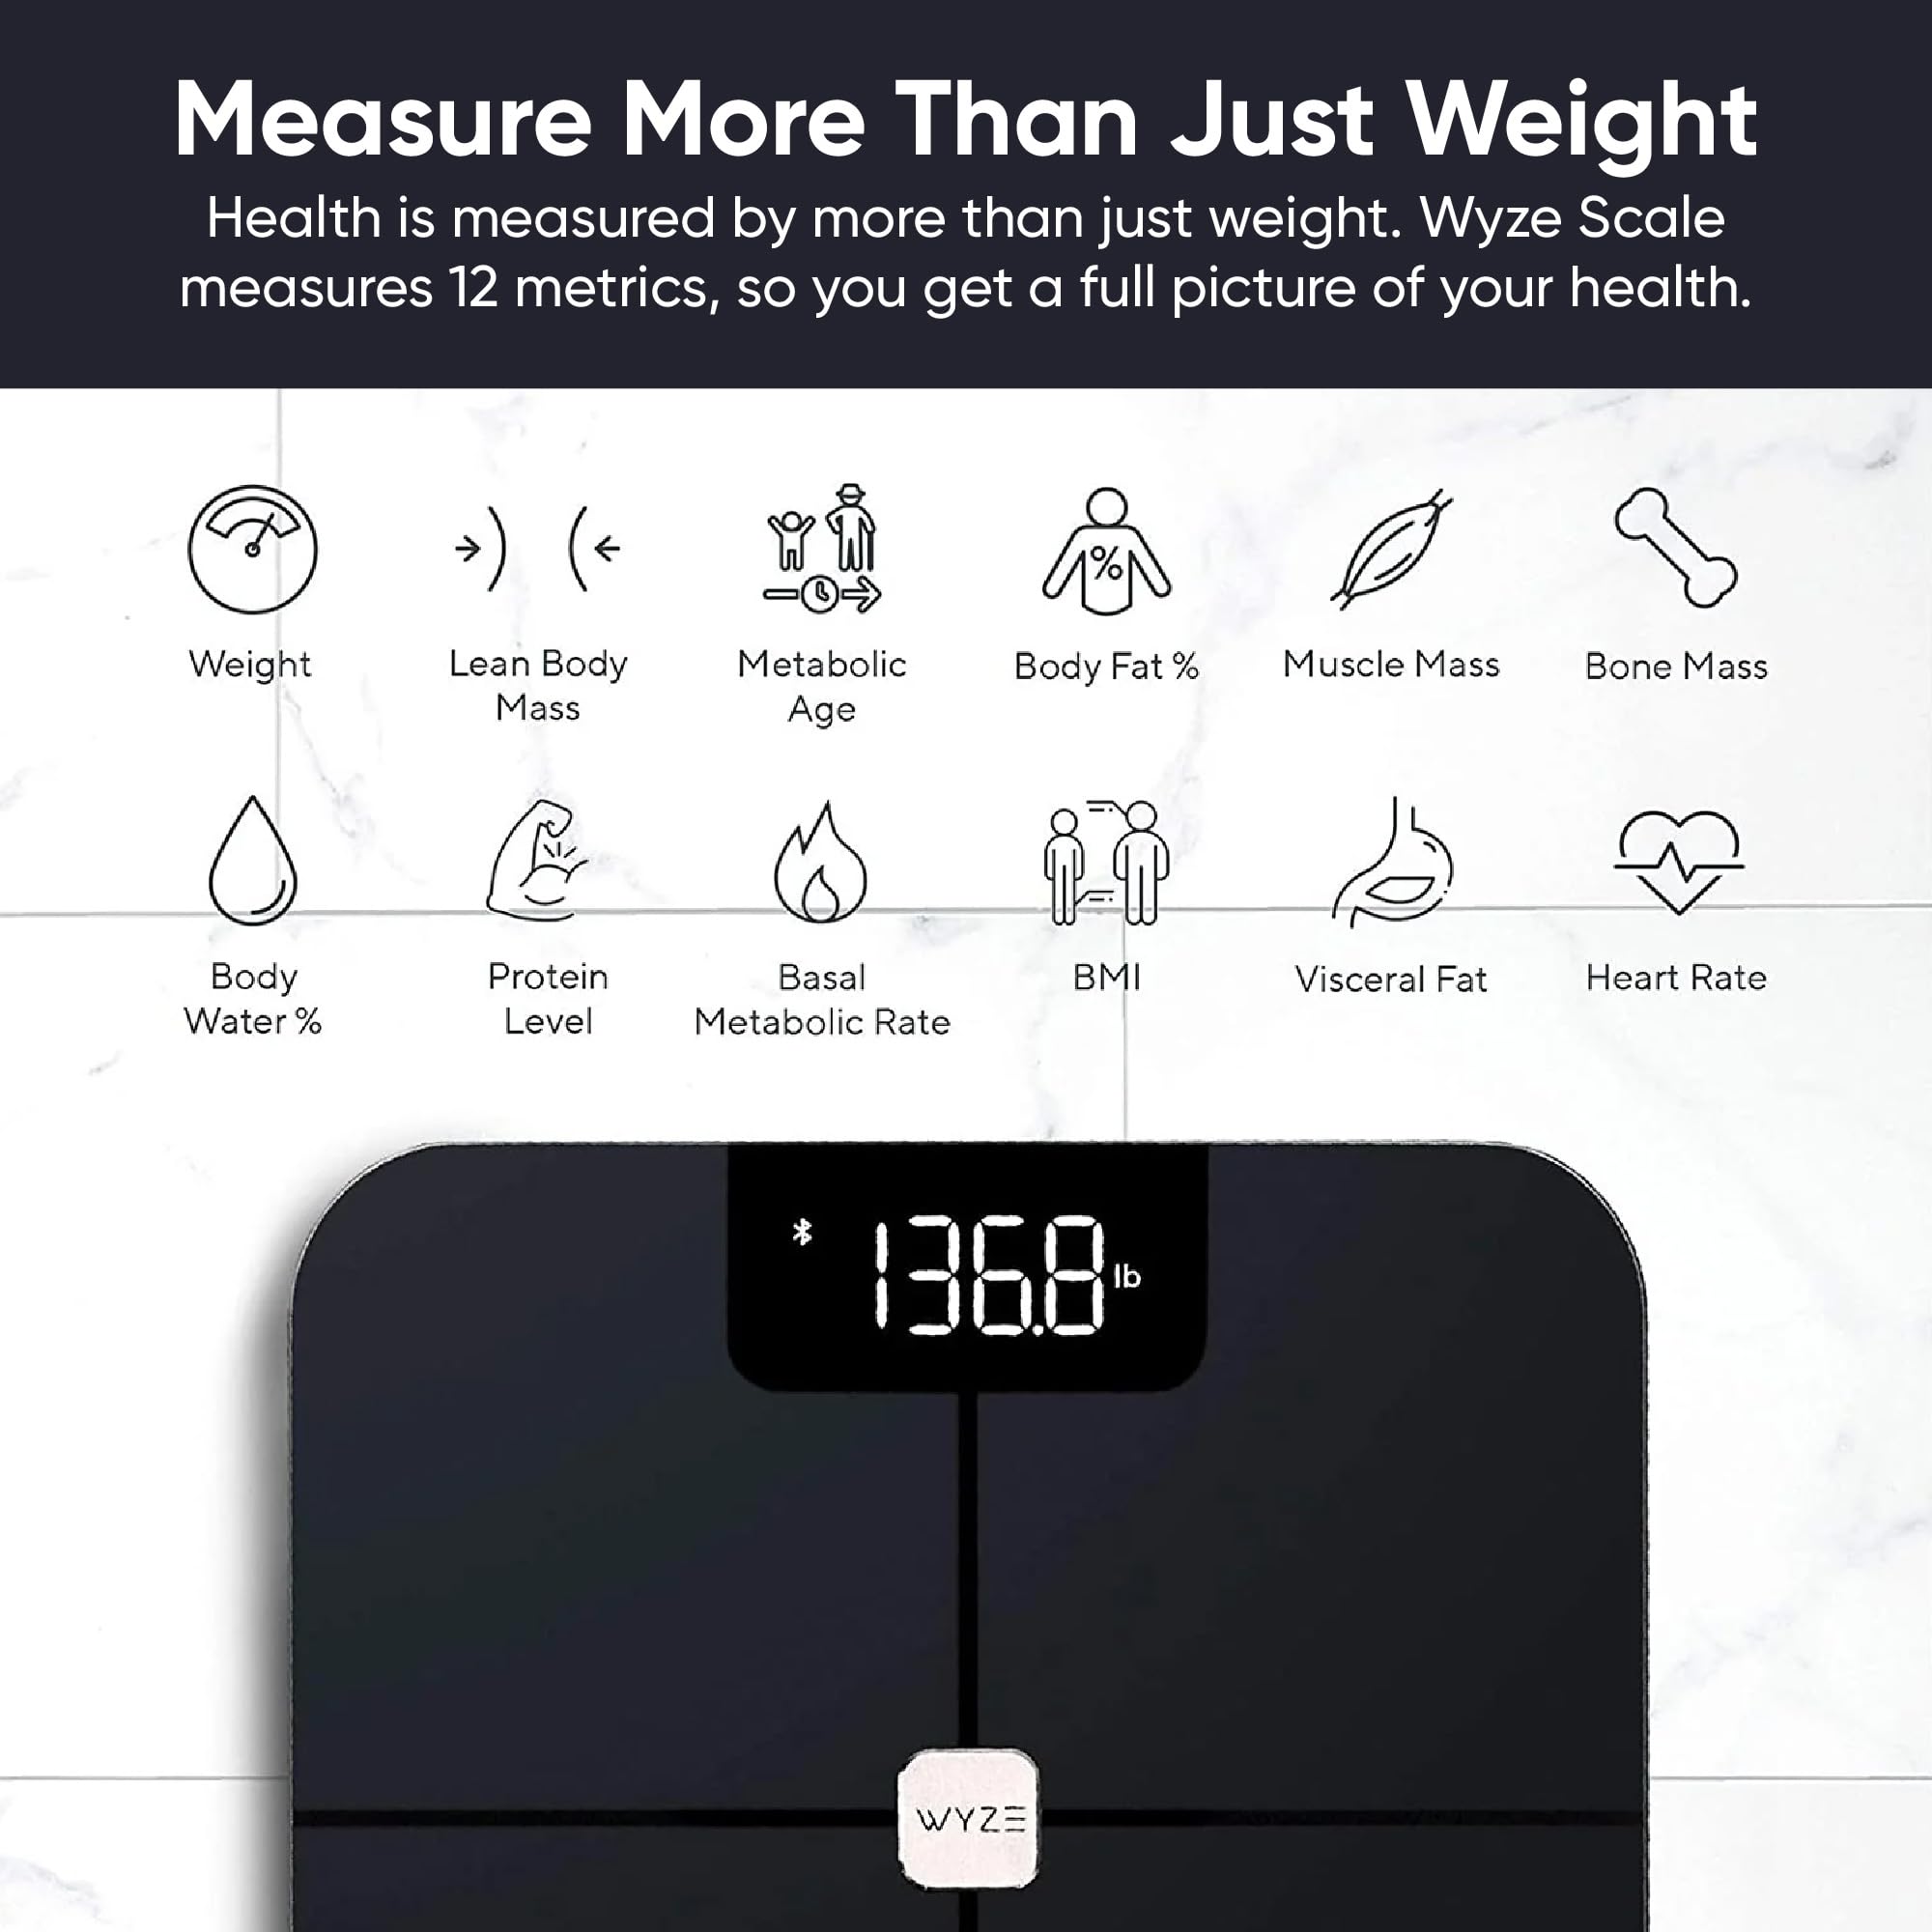 Wyze Smart Scale, Wireless Digital Bathroom Scale for Body Weight, BMI, Body Fat Percentage, Heart Rate Monitor, App Connected, Bluetooth, 400 lb Capacity (Black)